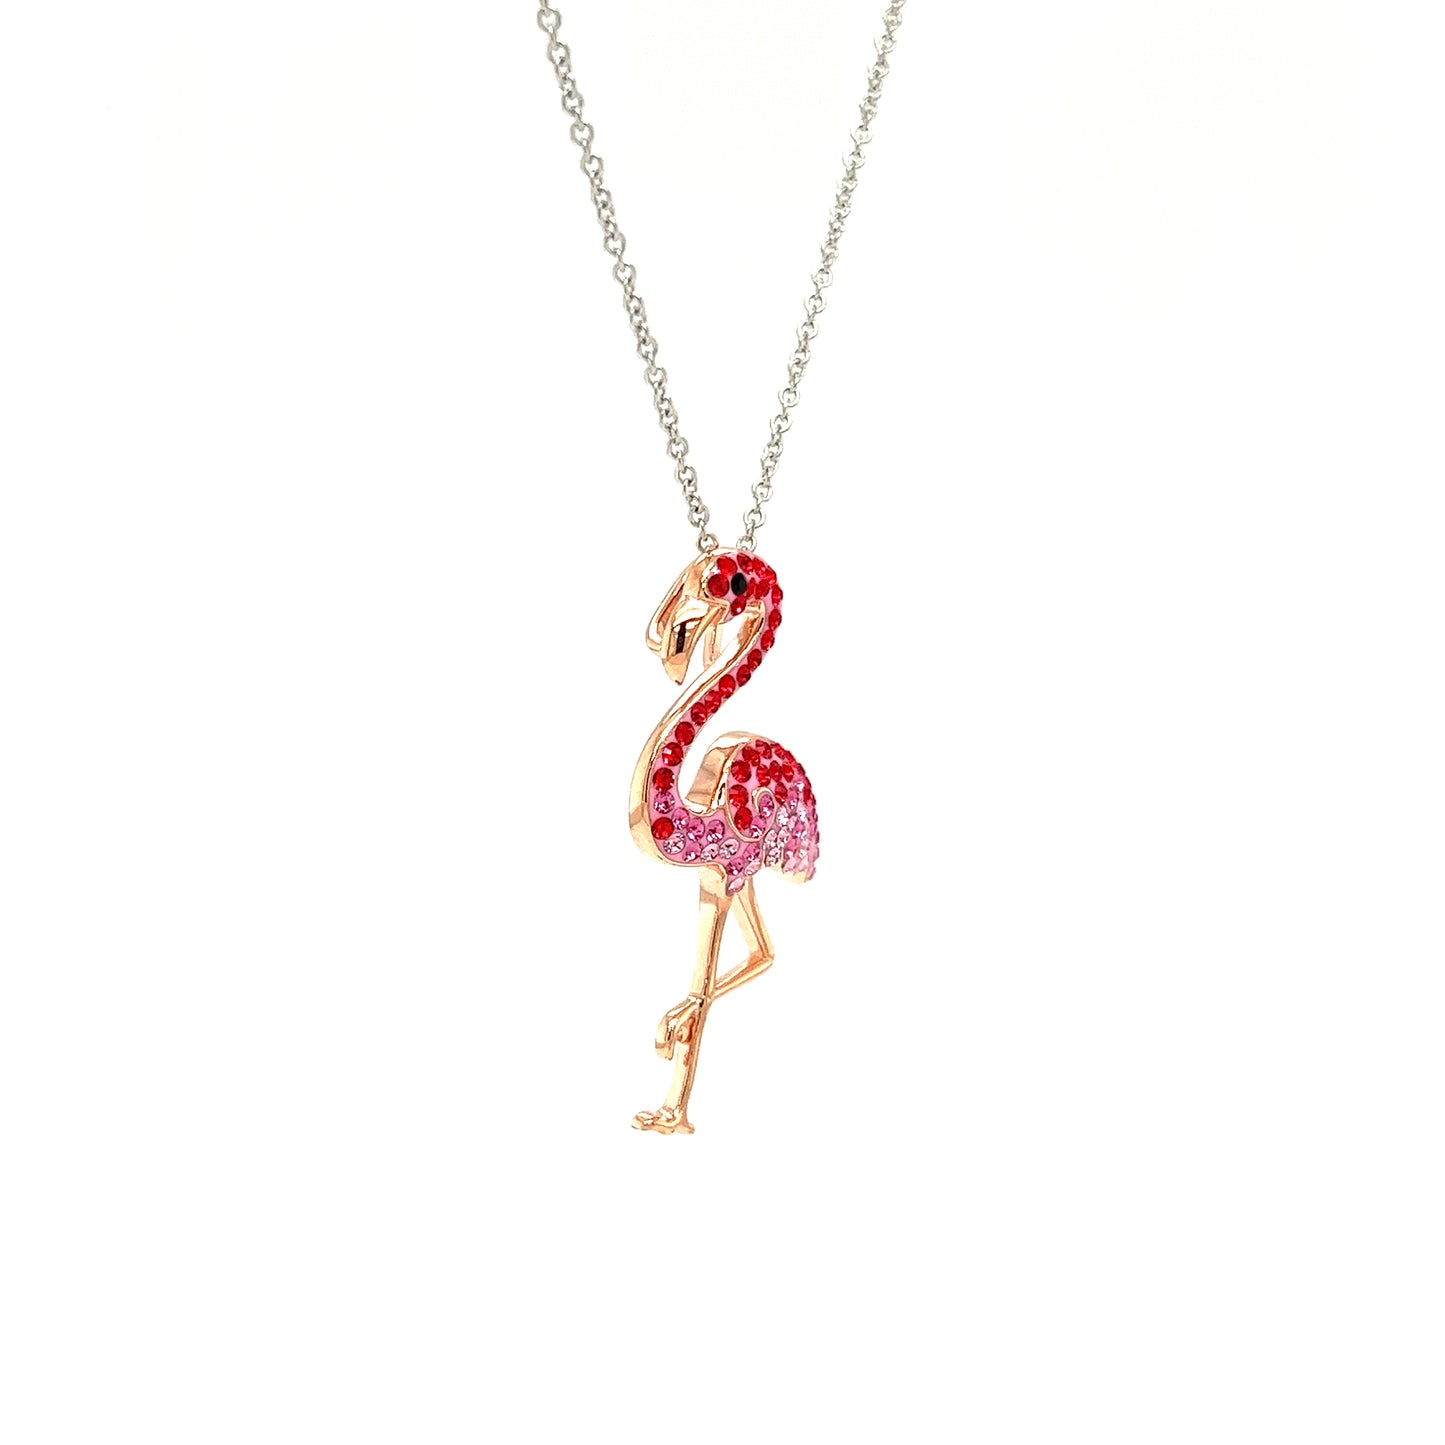 Flamingo Necklace with Red and Pink Crystals and Rose Gold Plating in Sterling Silver Left Side View